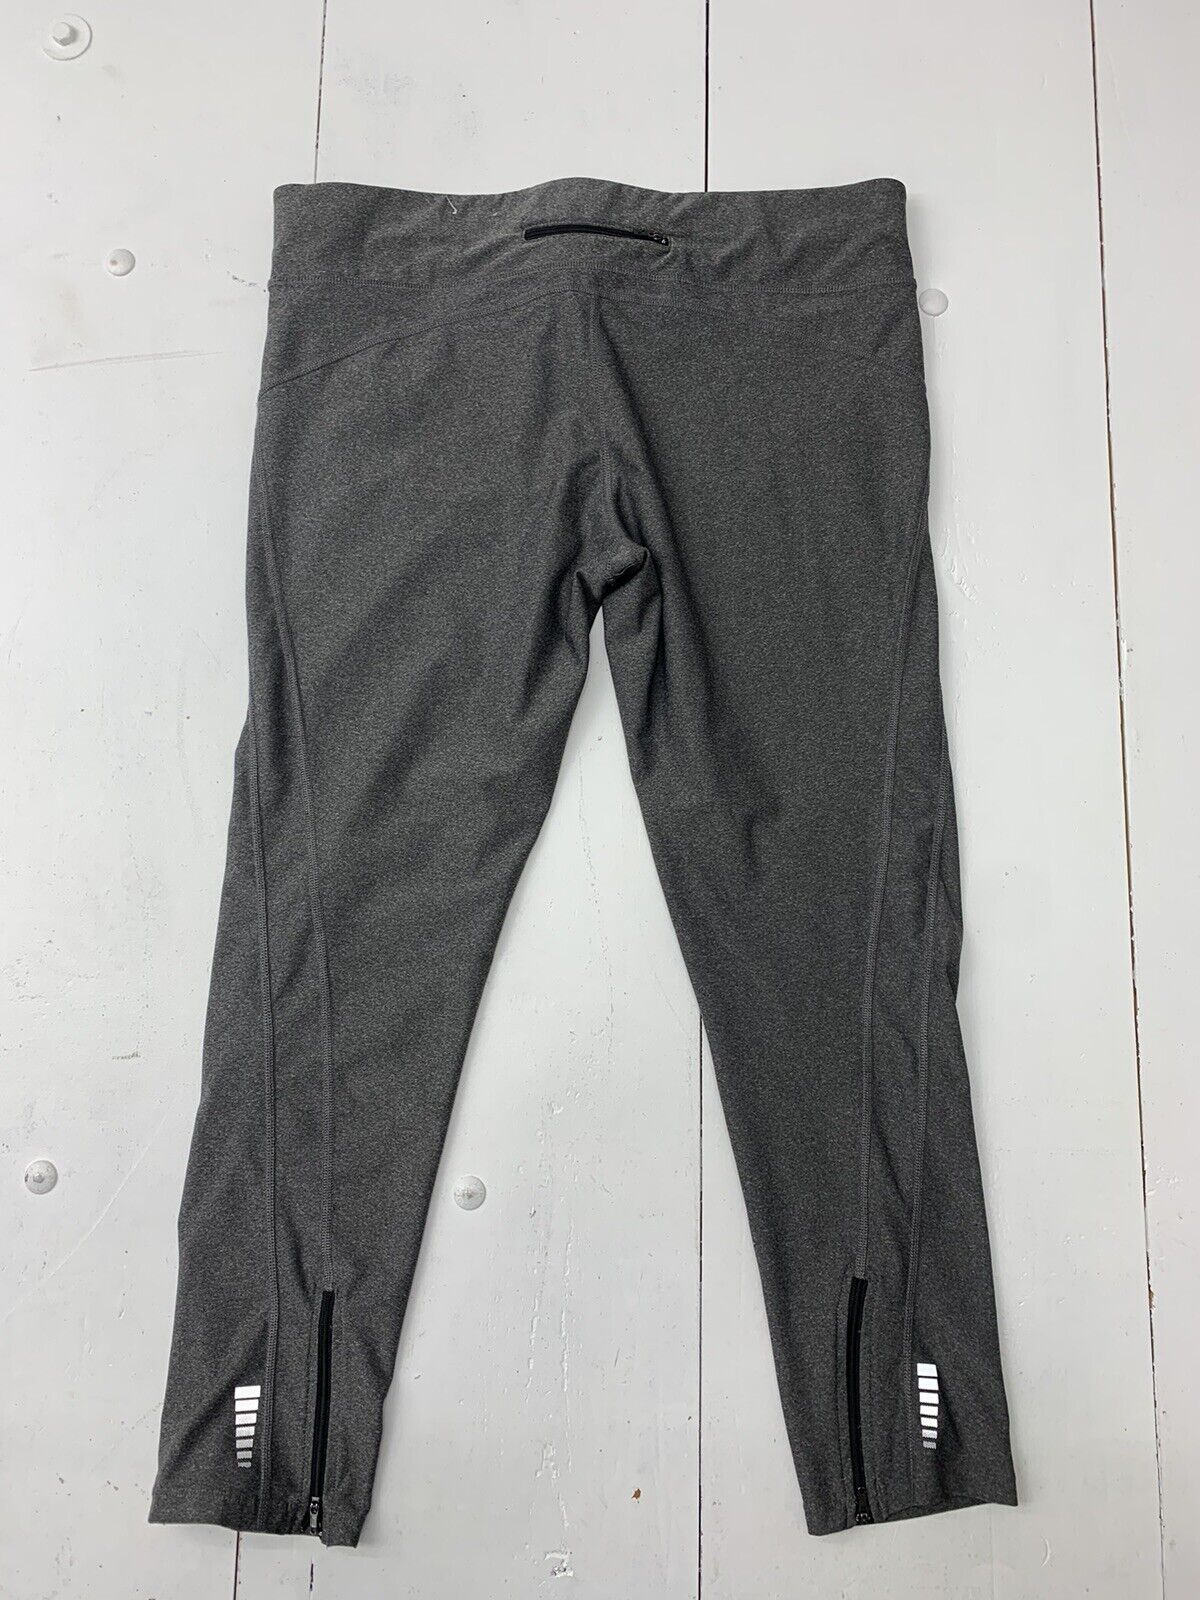 Xersion Womens Grey Fitted Leggings Size XL - beyond exchange